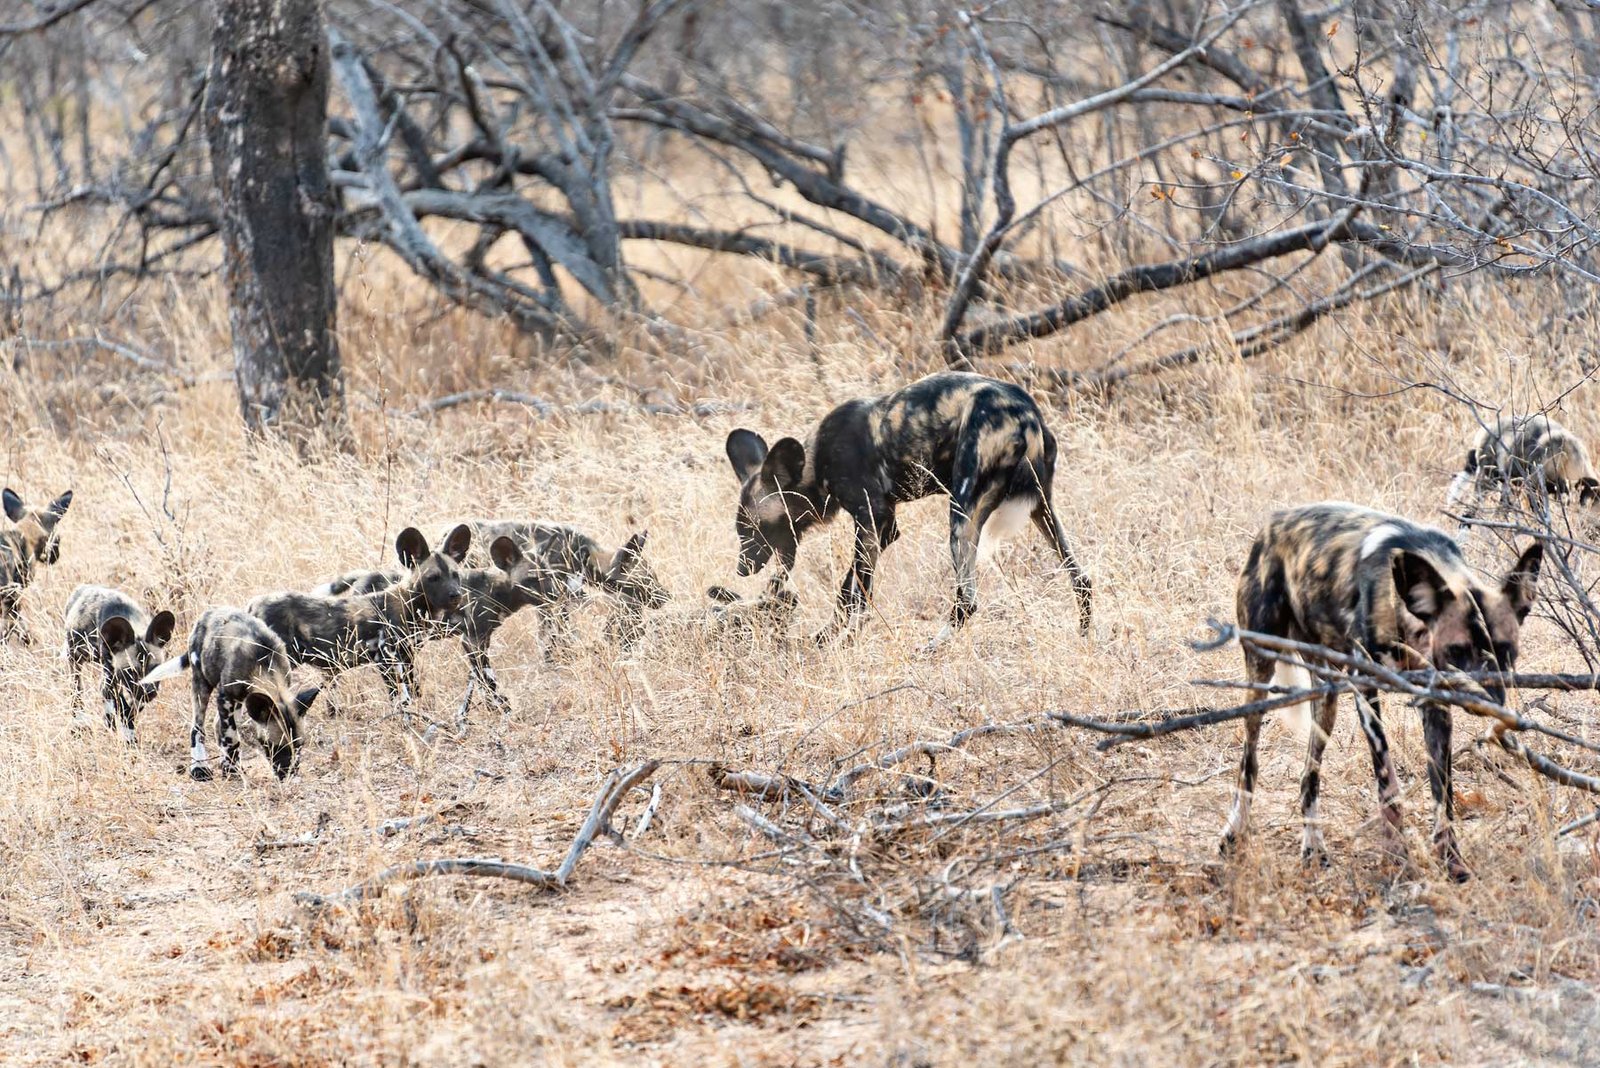 Wild dogs in South Africa - - Check out my review of staying at Klaserie Sands River Camp, a beautiful boutique (4 suites), luxury safari lodge in Greater Kruger (Big 5), South Africa